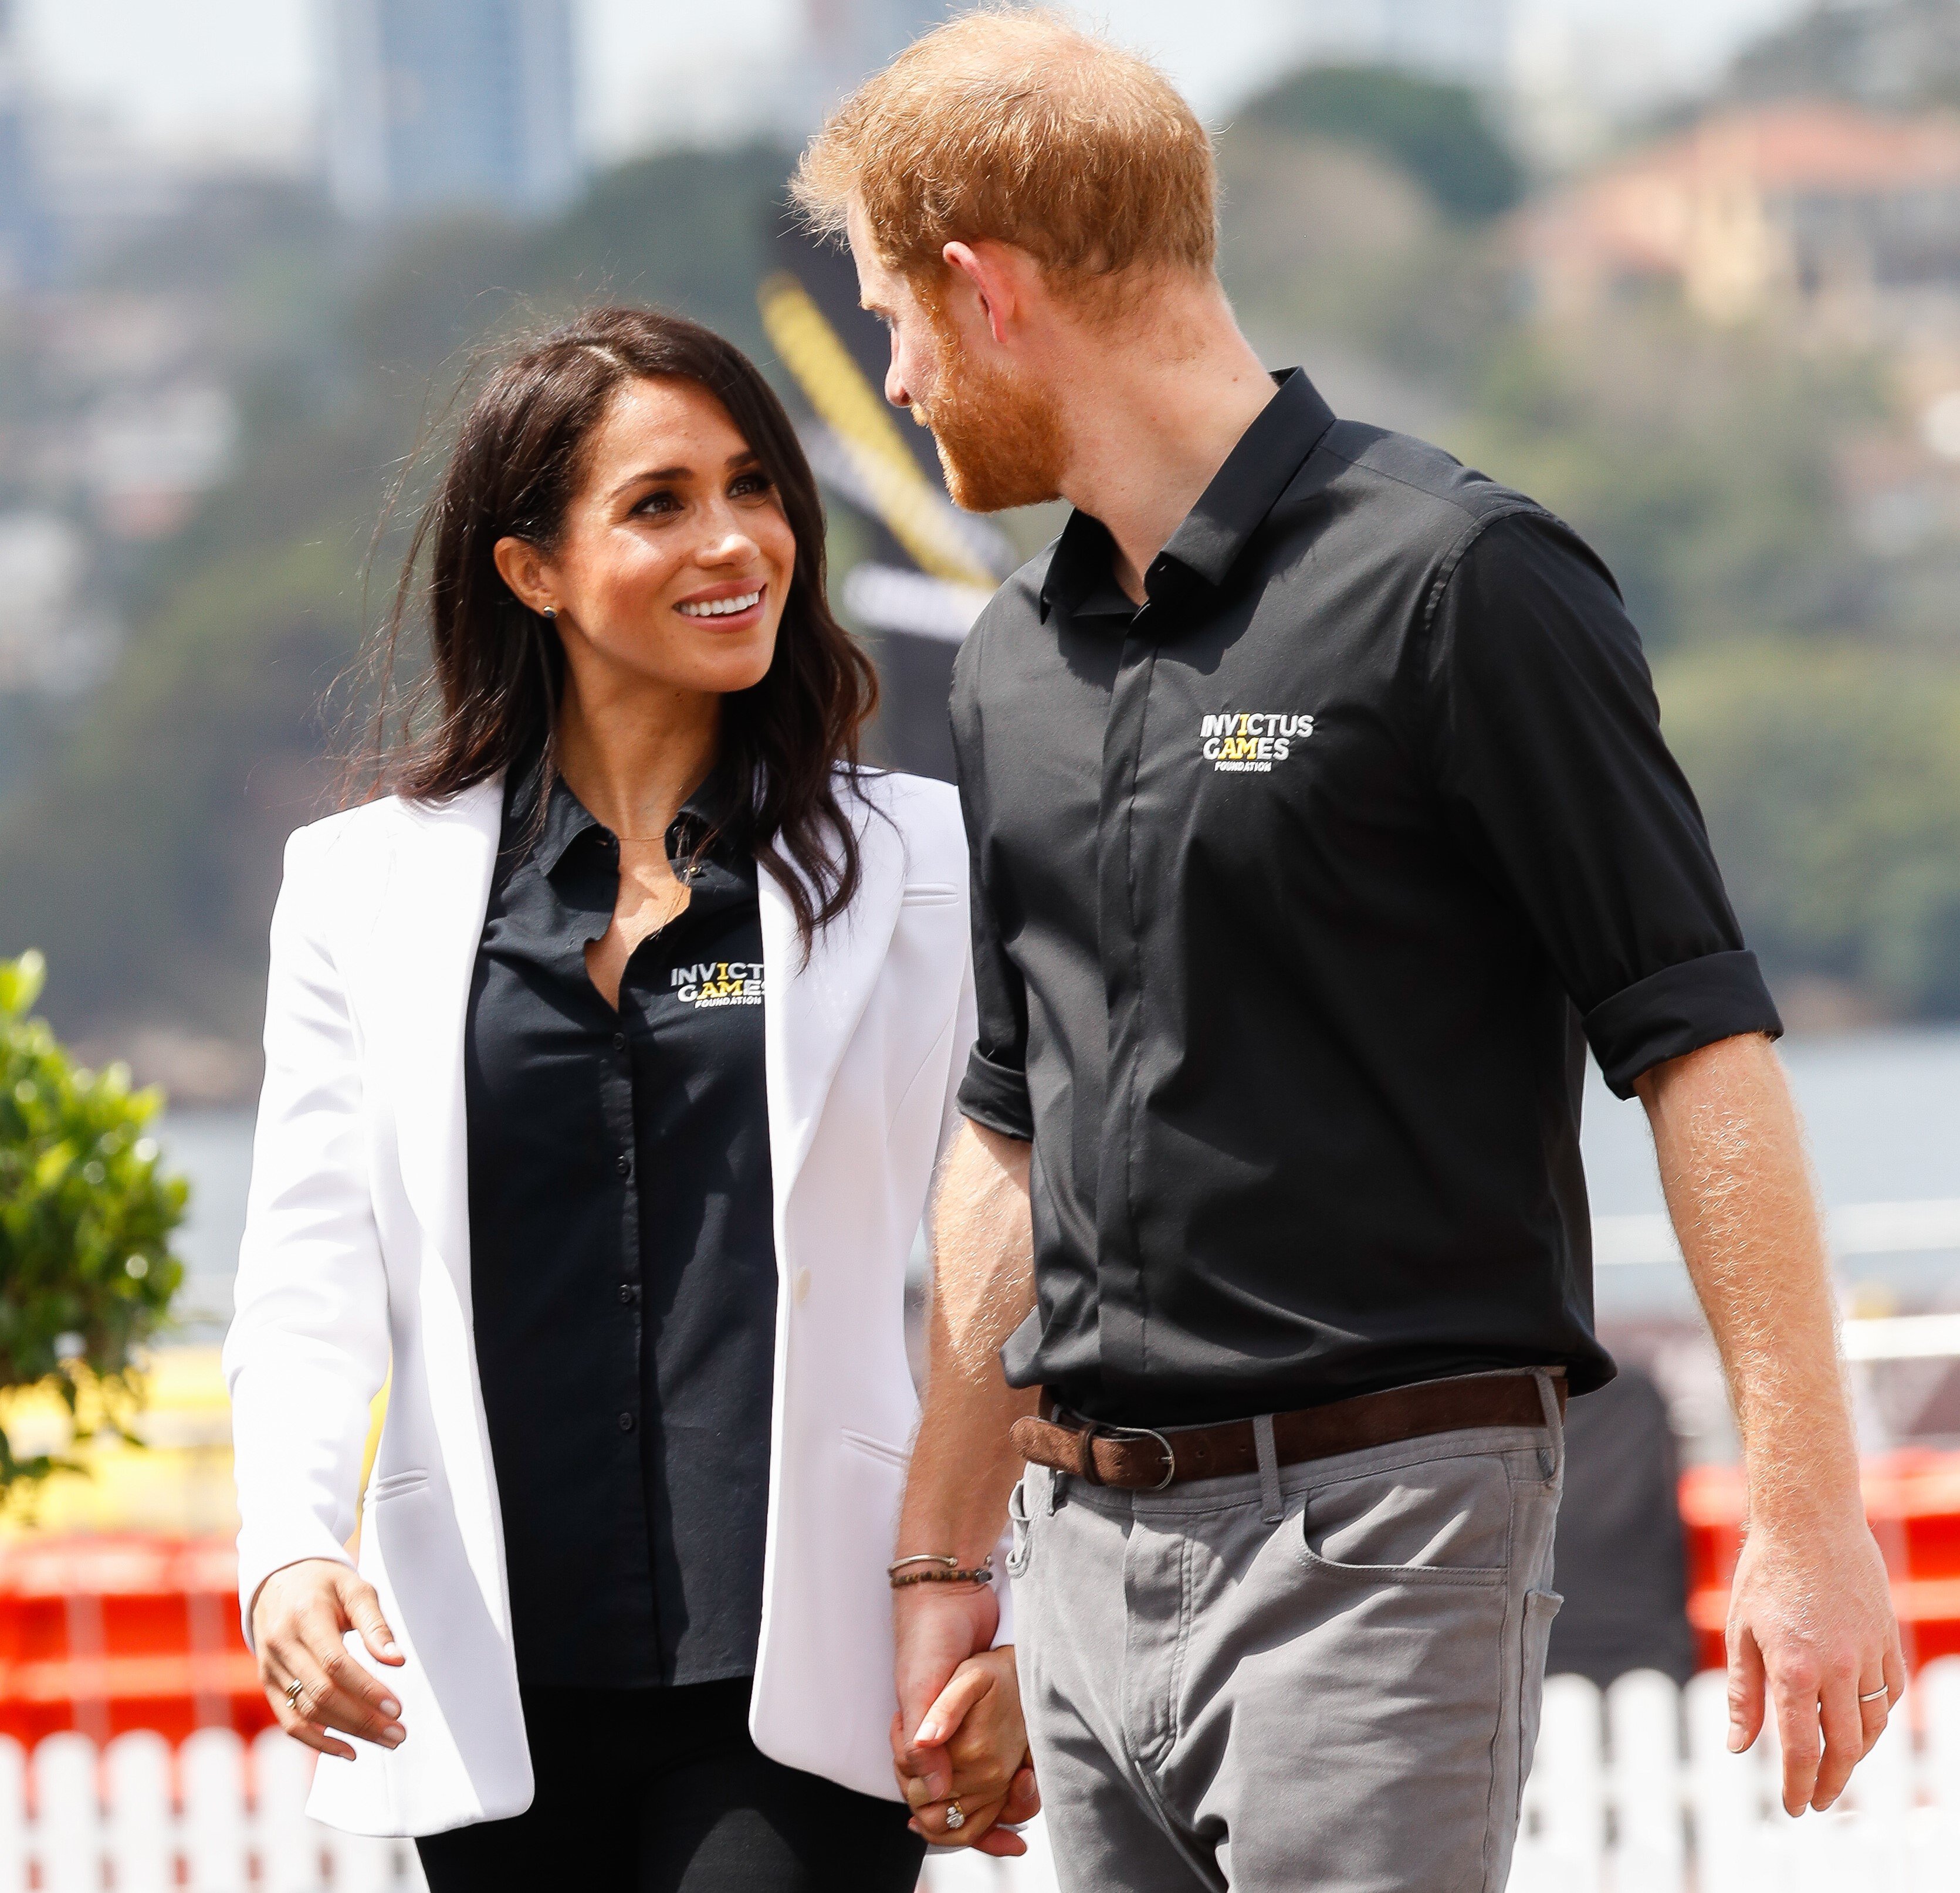 Prince Harry and Meghan holding hands during the JLR Drive Day at Cockatoo Island